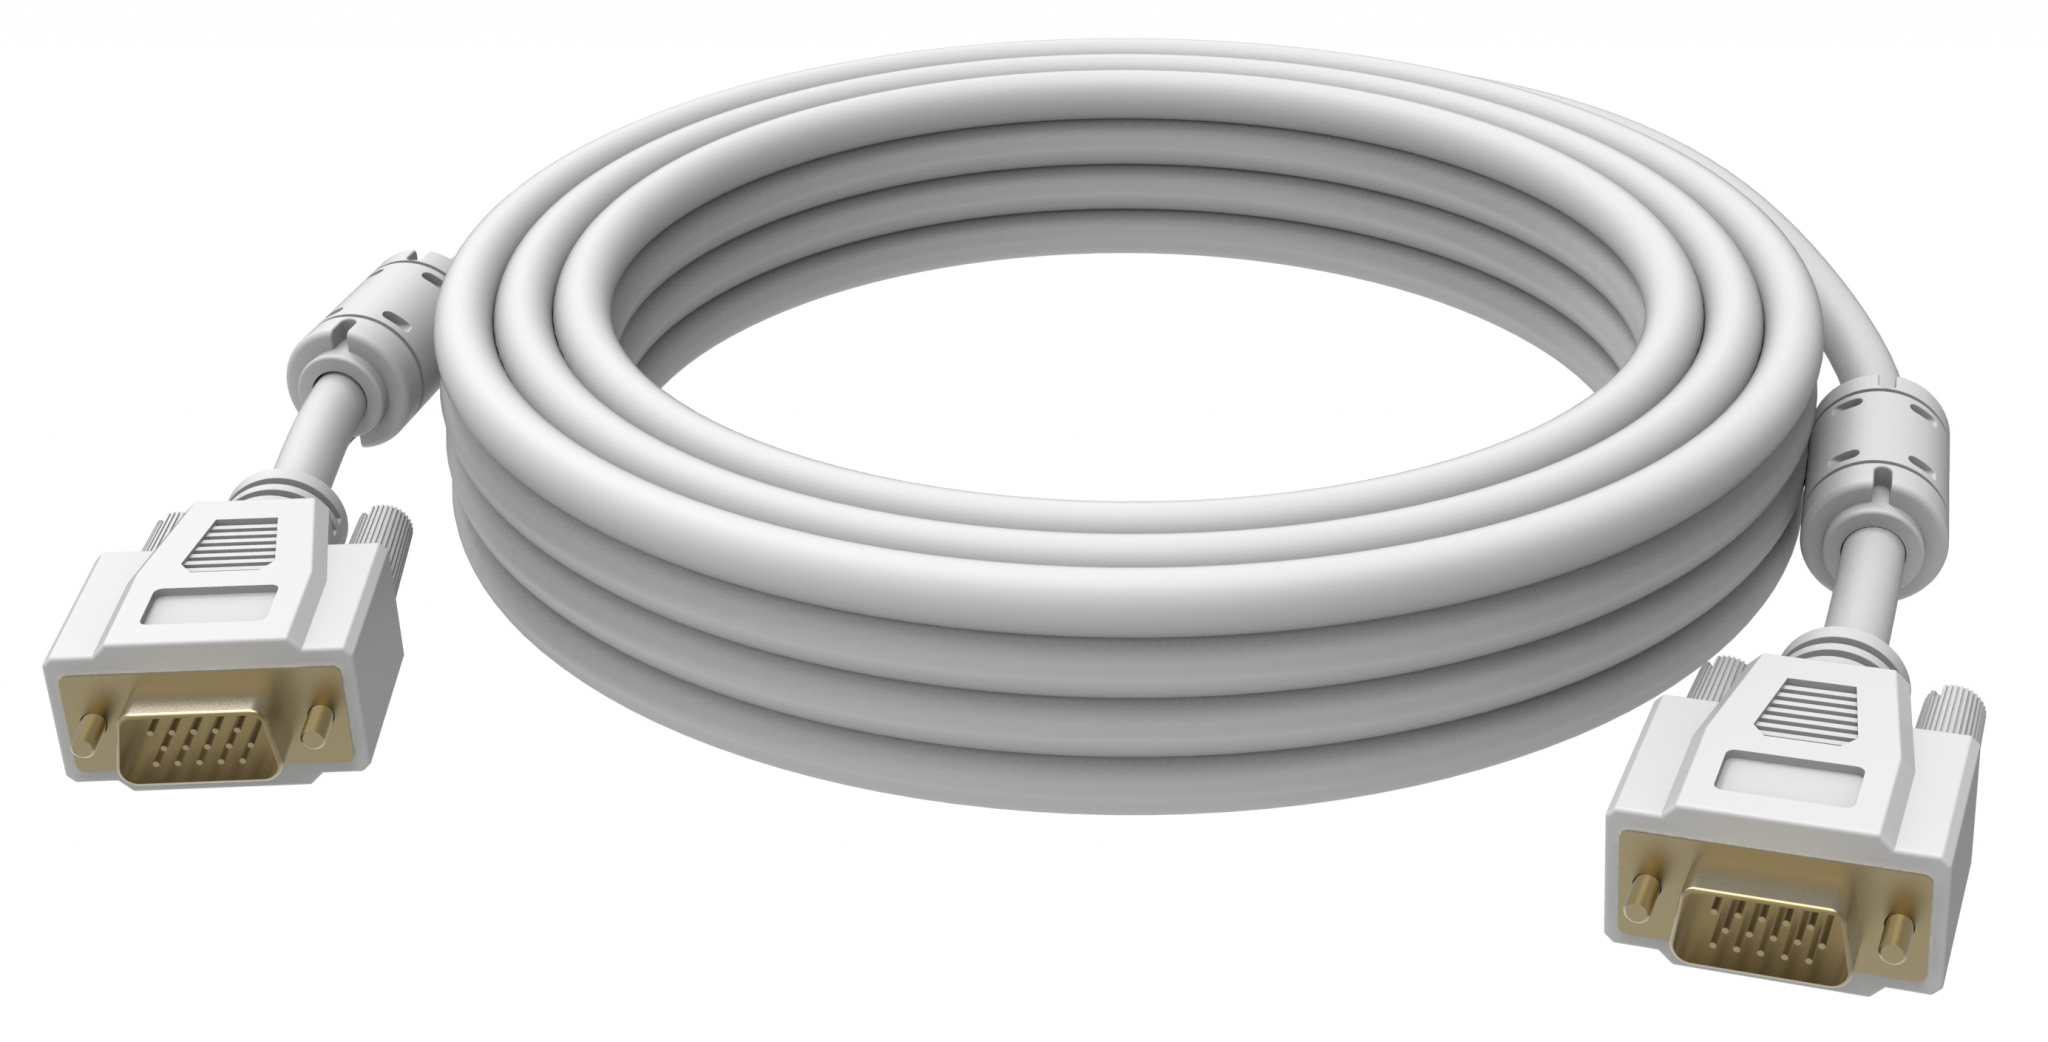 An image showing Cable blanco tipo VGA de 10 m (33 pies)